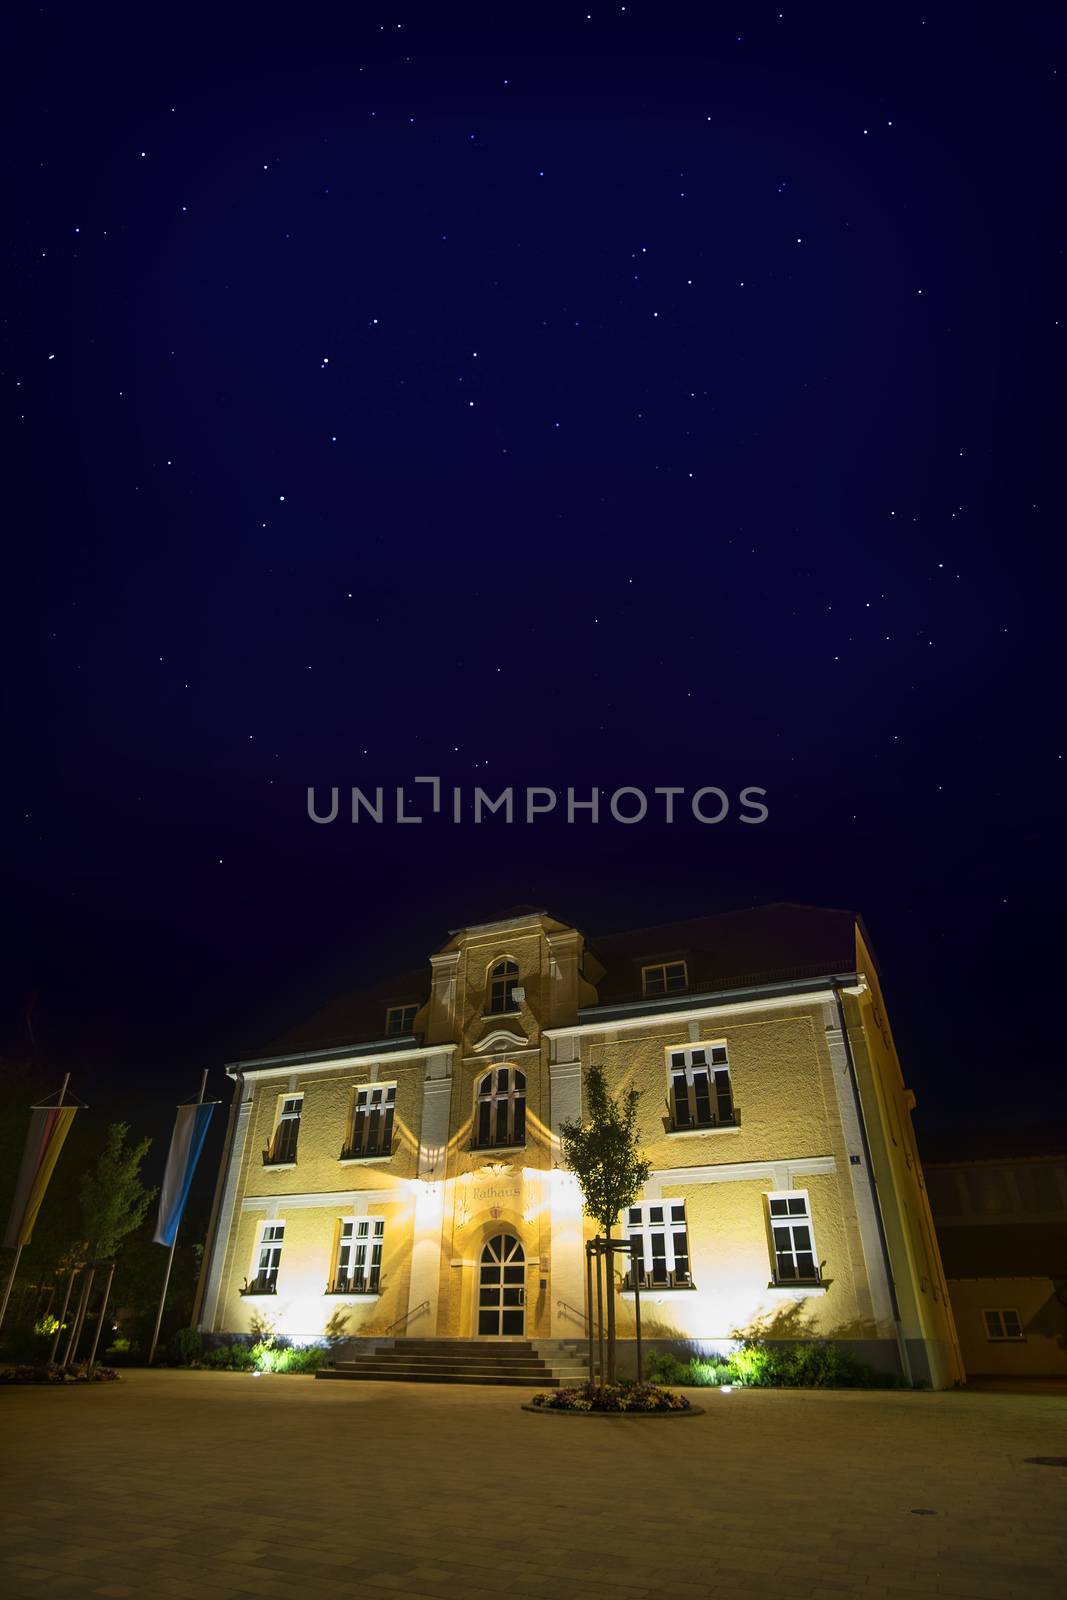 Illuminated townhall in village Maisach in Bavaria, Germany at night with stars in the sky